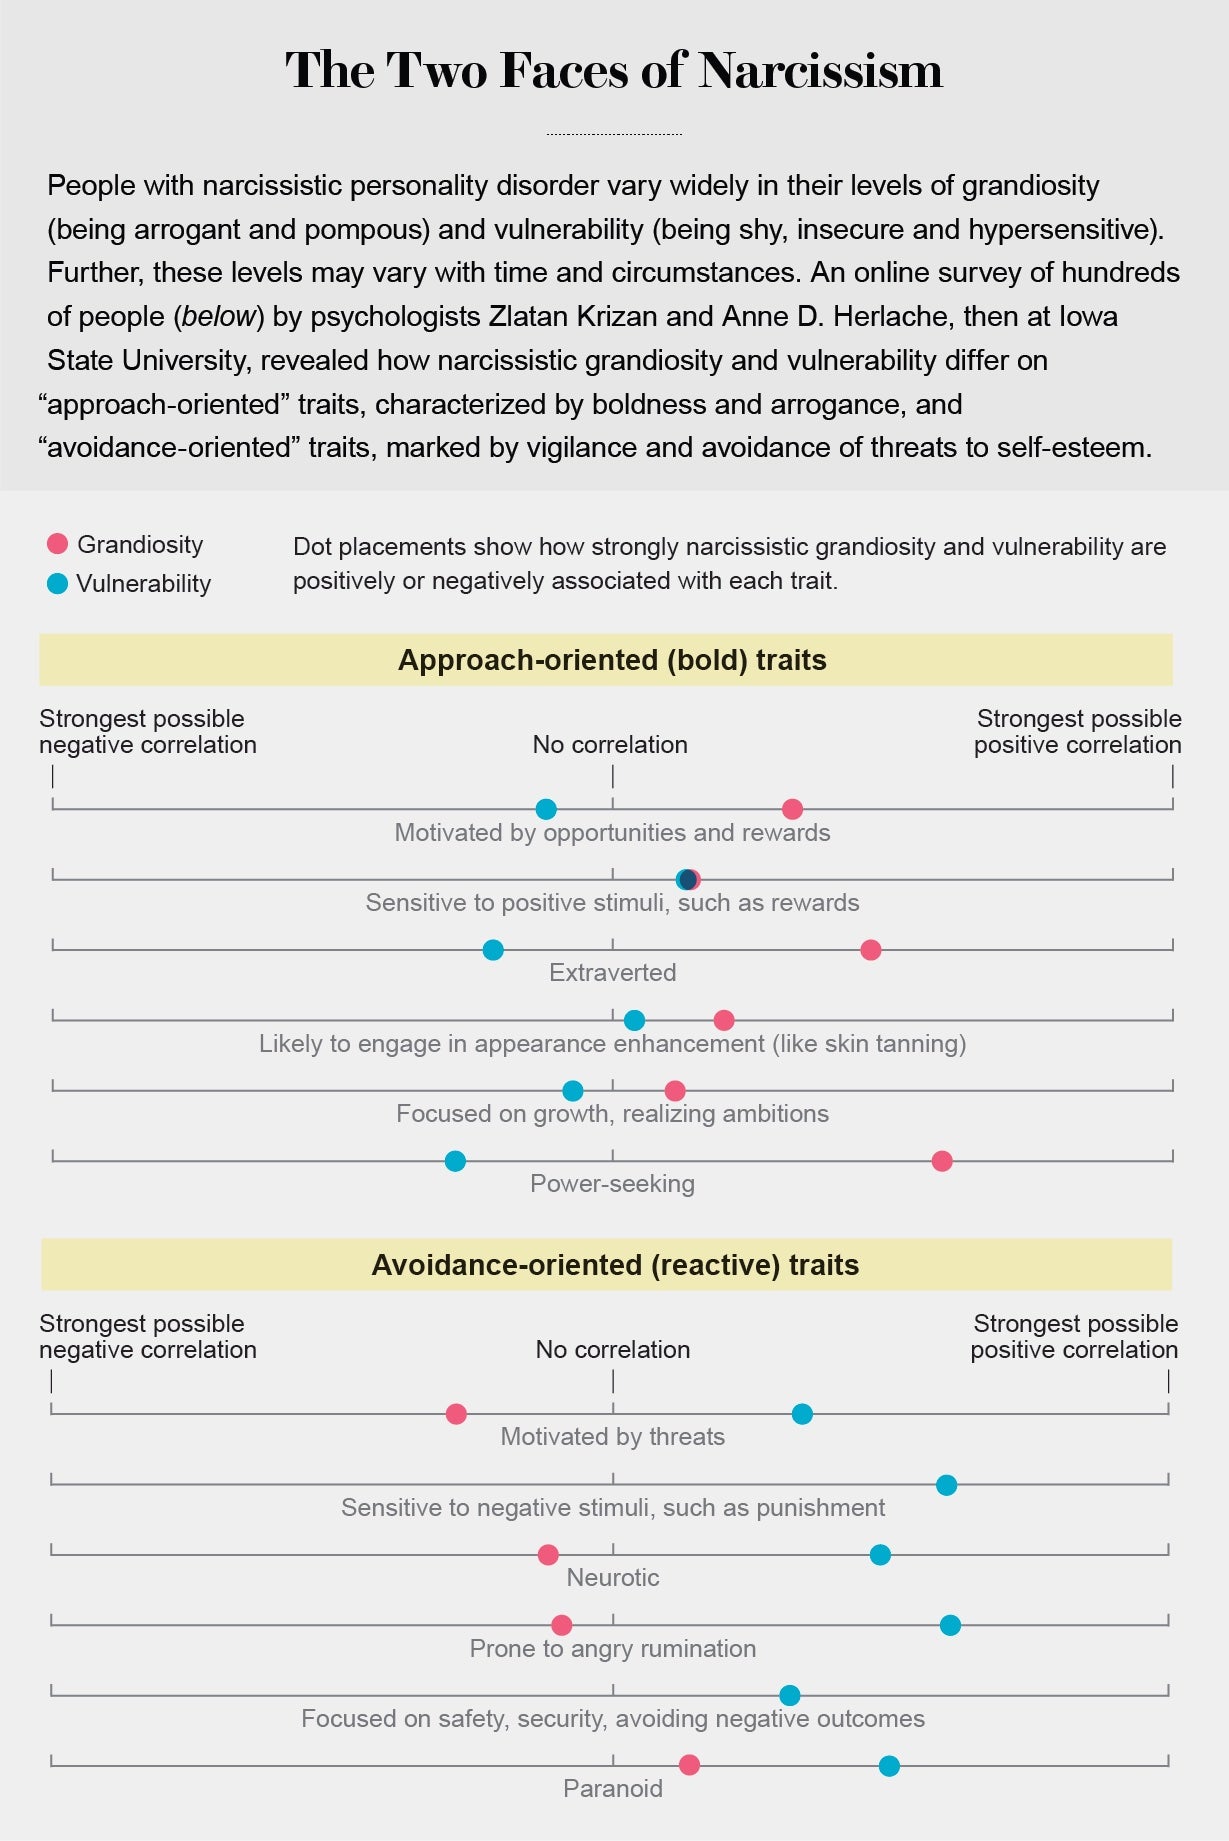 Graphic shows where narcissistic grandiosity and vulnerability fall along spectra of various approach-oriented (bold) and avoidance-oriented (reactive) traits, from strongest possible negative to strongest possible positive correlation.